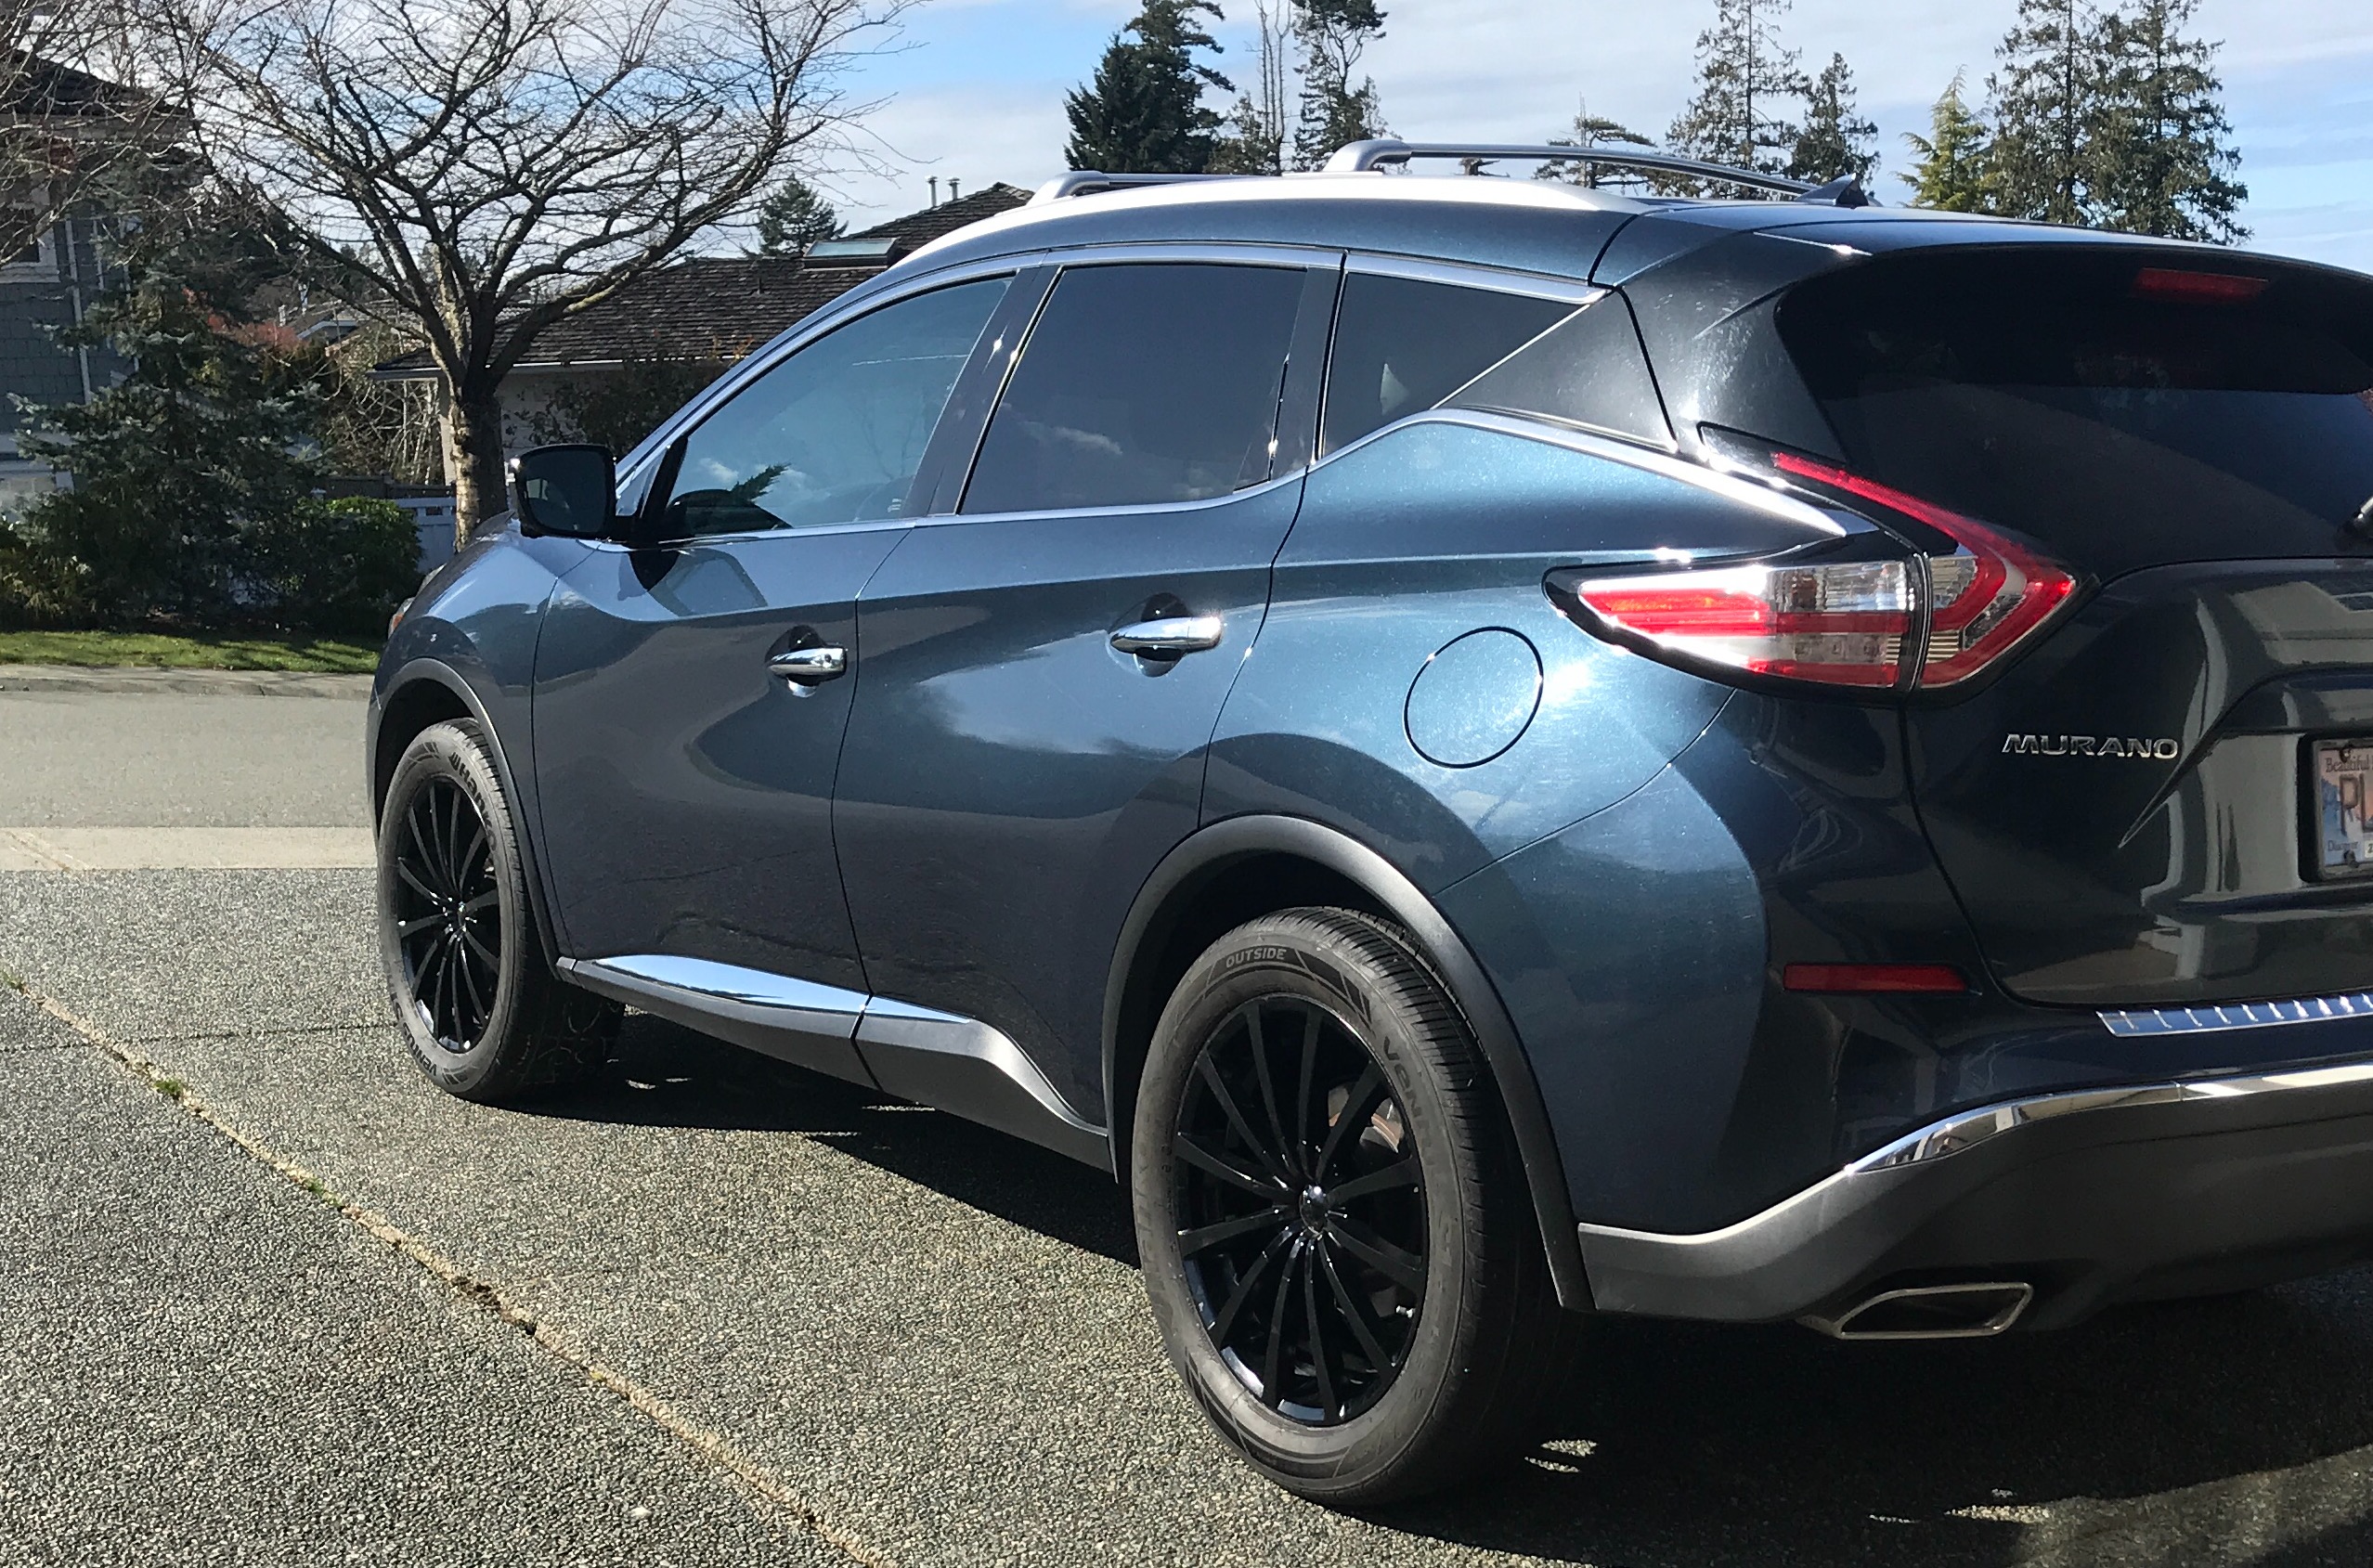 Best Tires For Nissan Murano